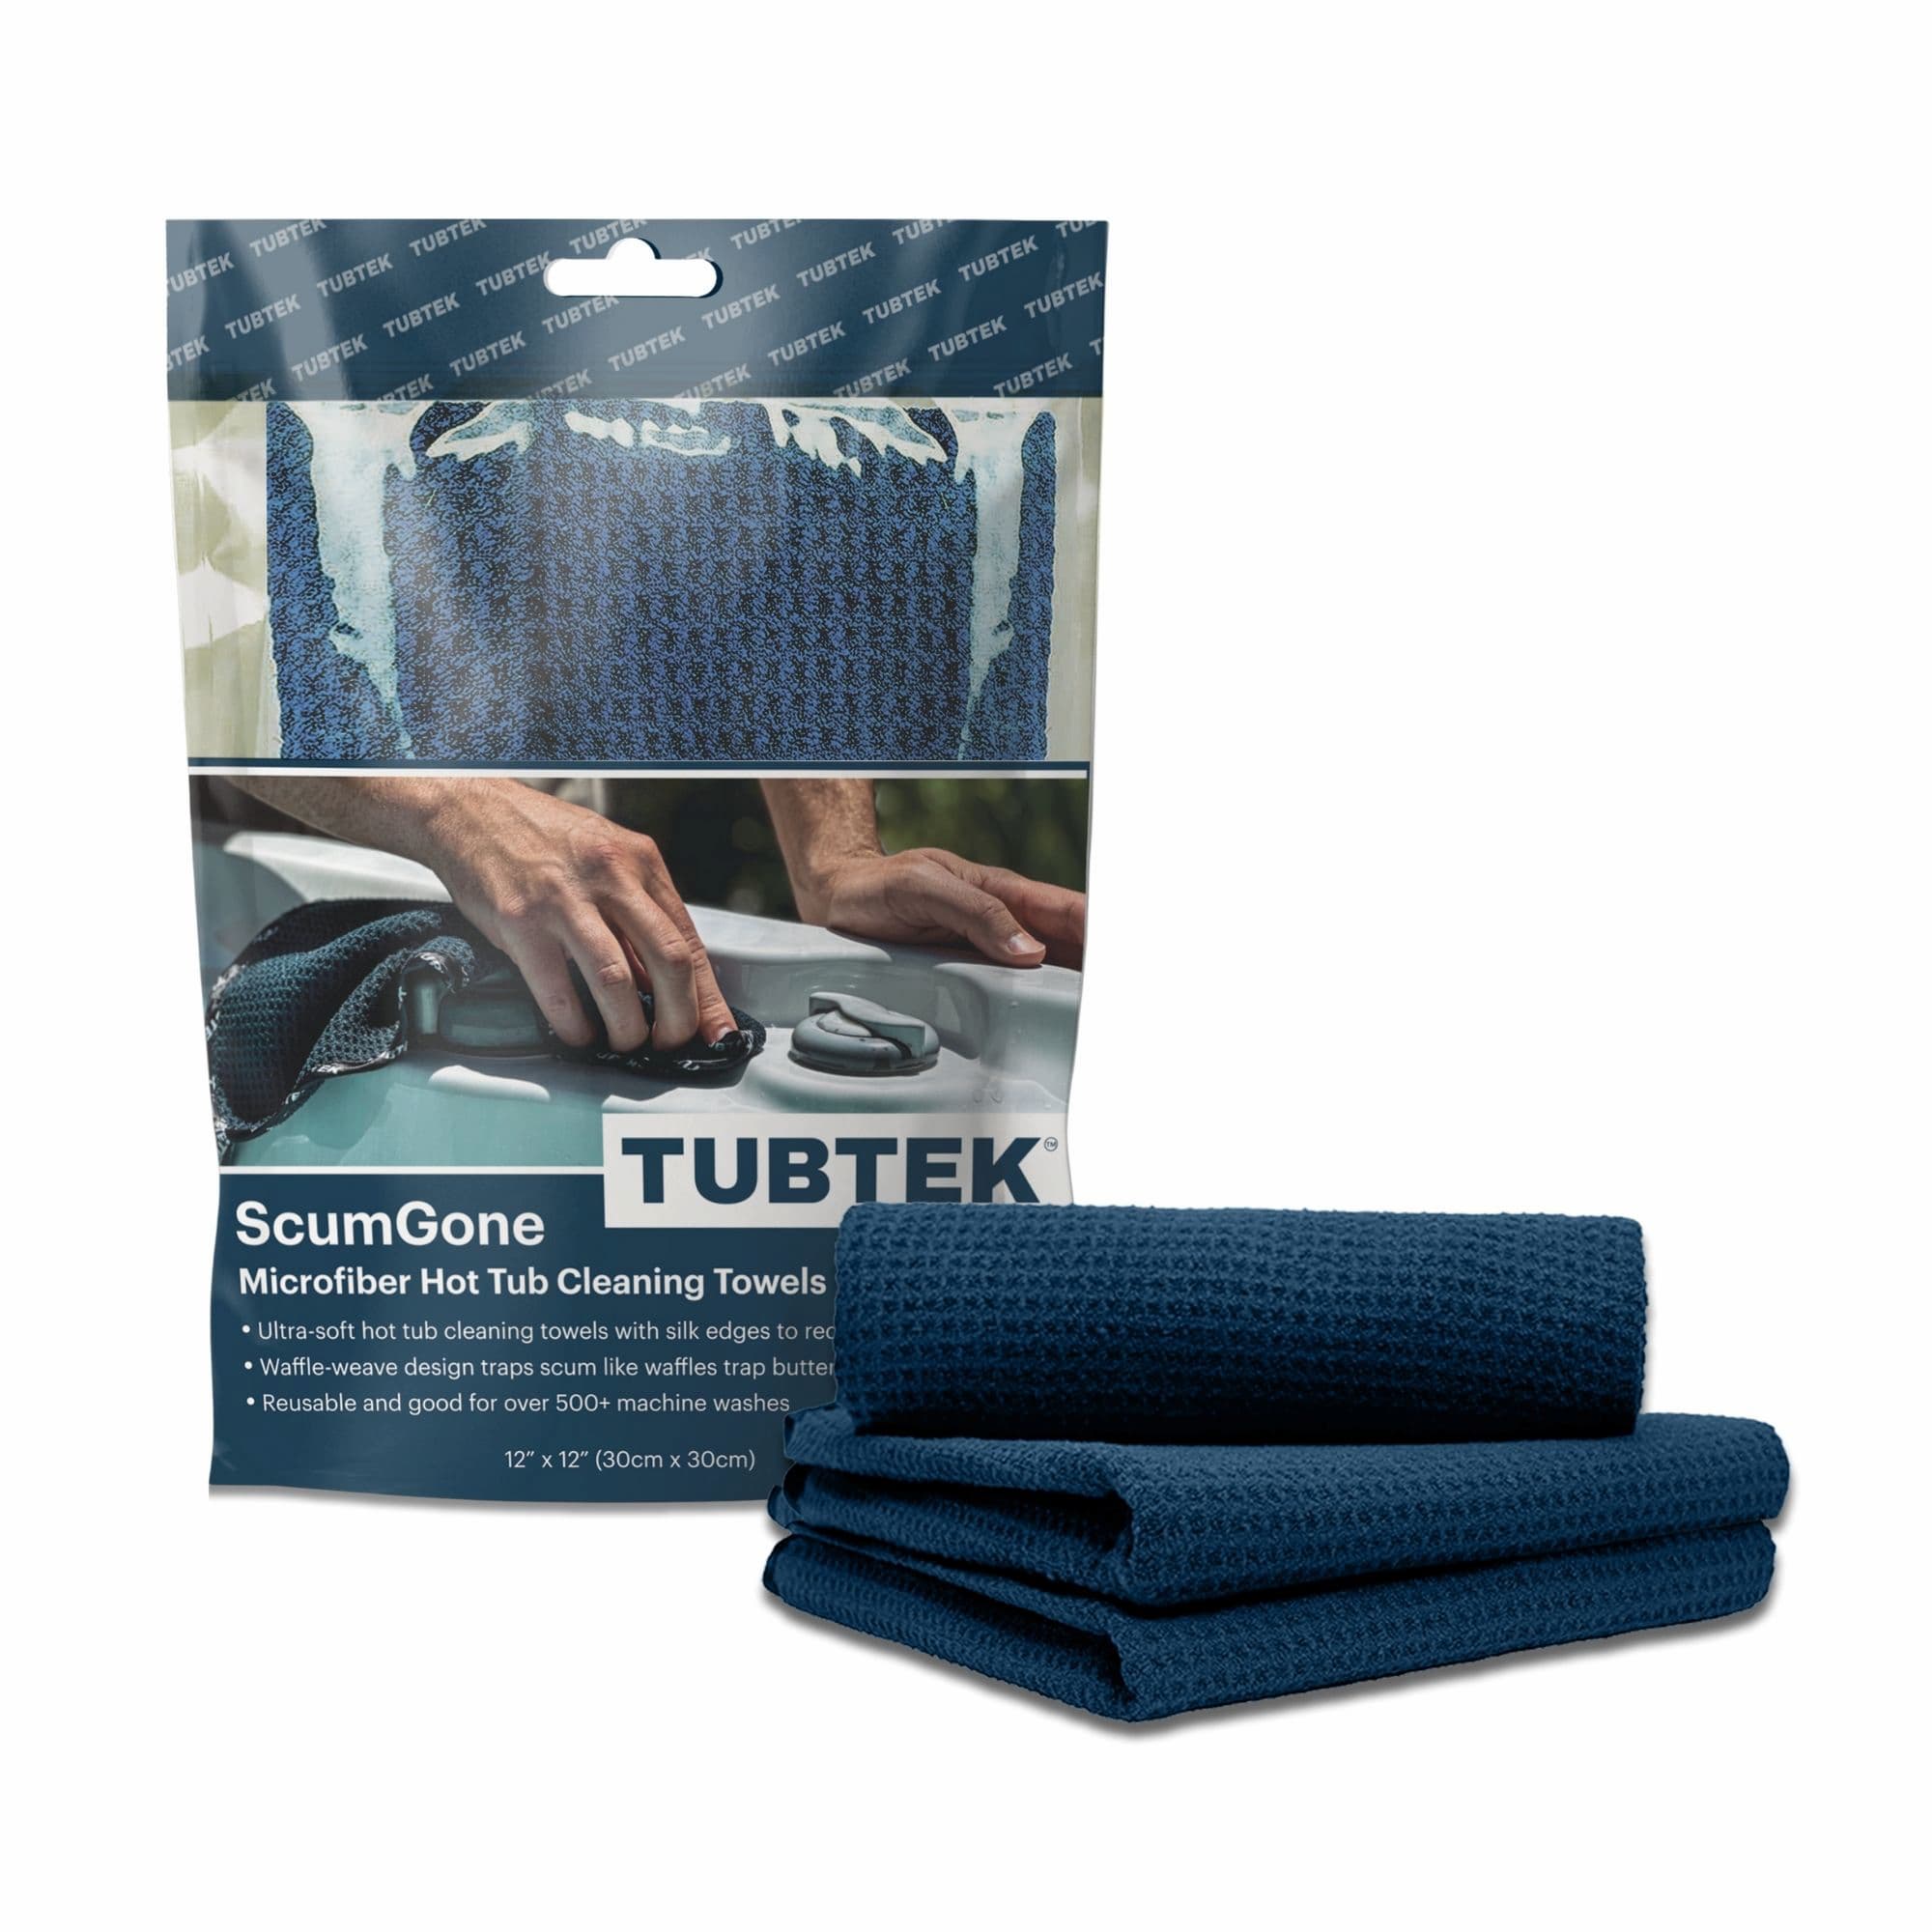 ScumGone Microfiber Cleaning Towels (3 Pack)